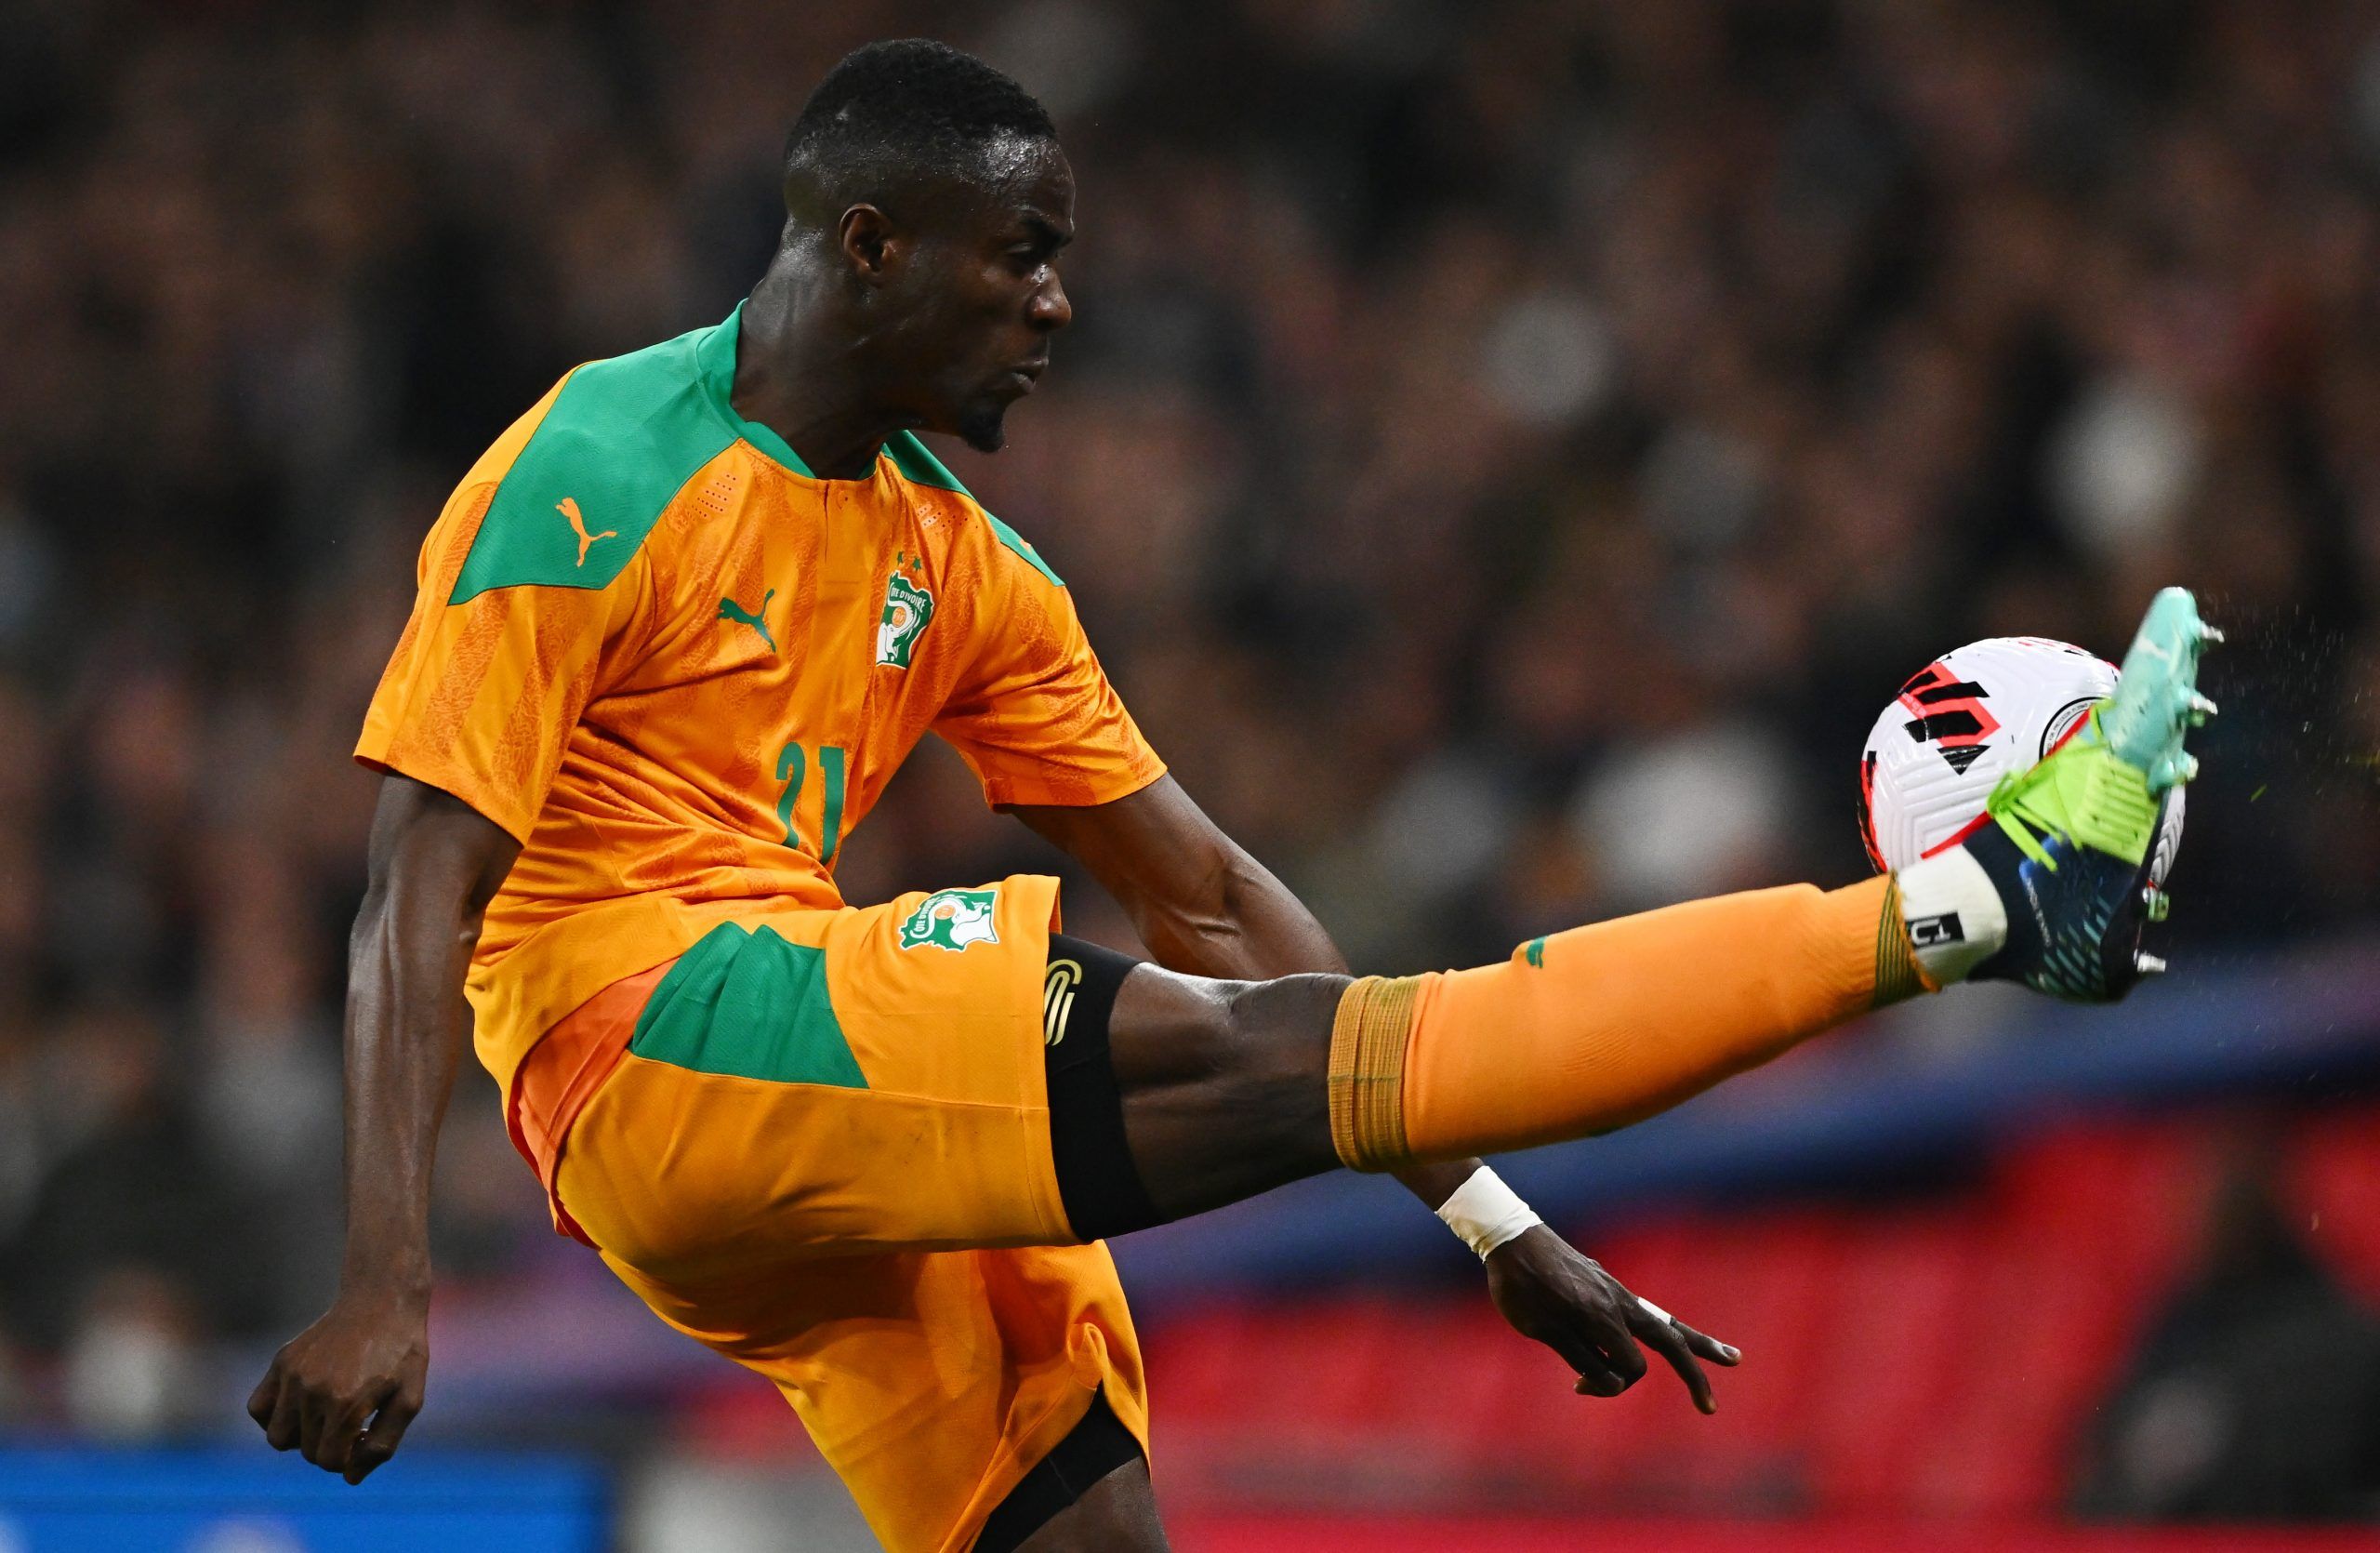 Aston Villa could move for Eric Bailly